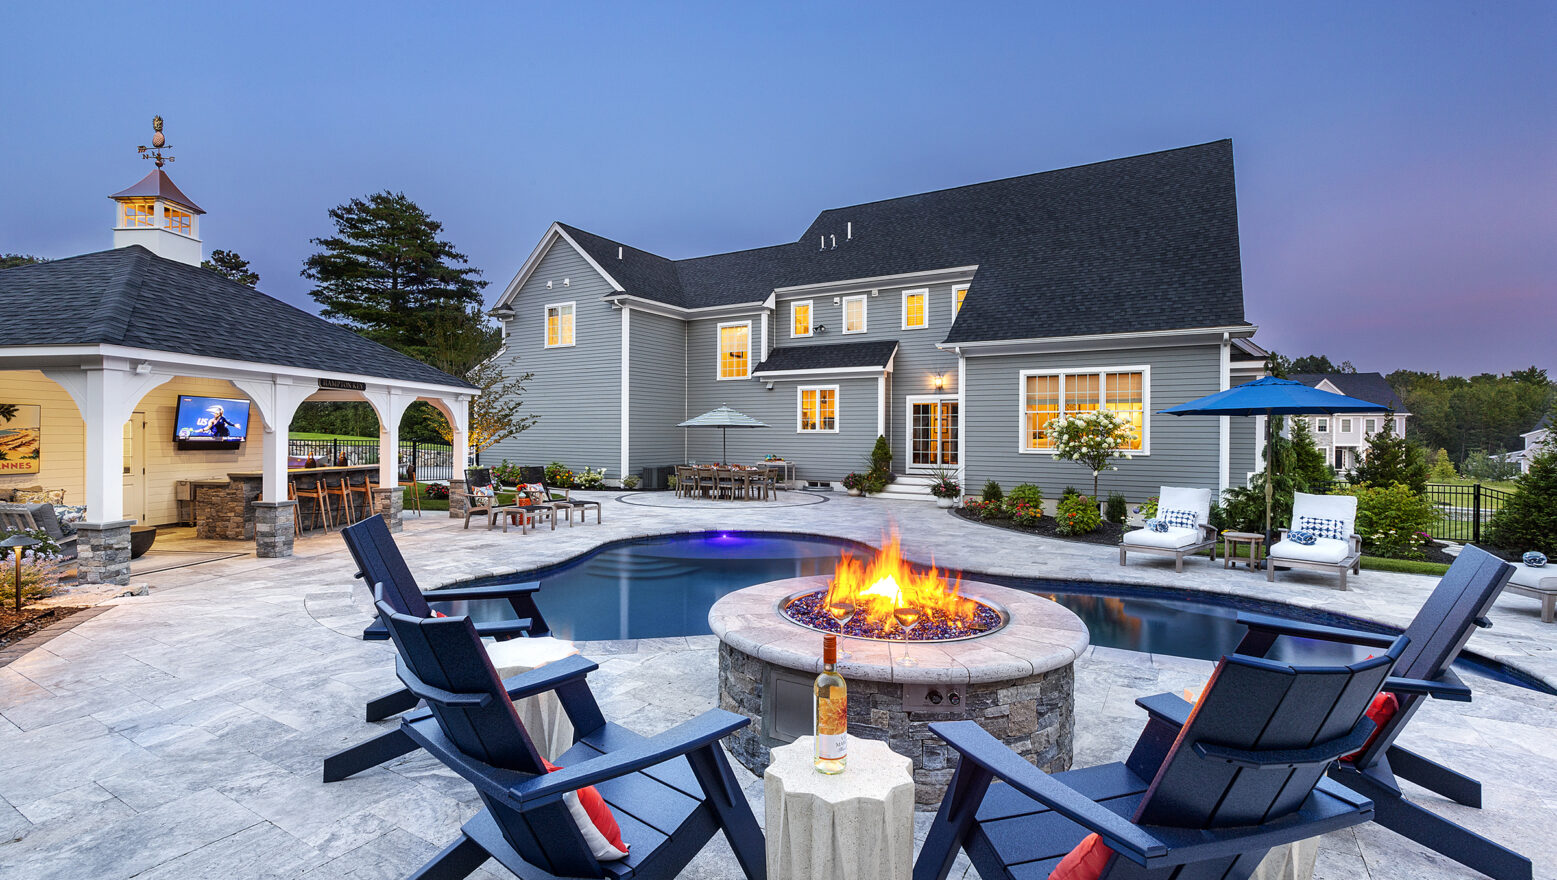 Backyard fire pit overlooking pool and home